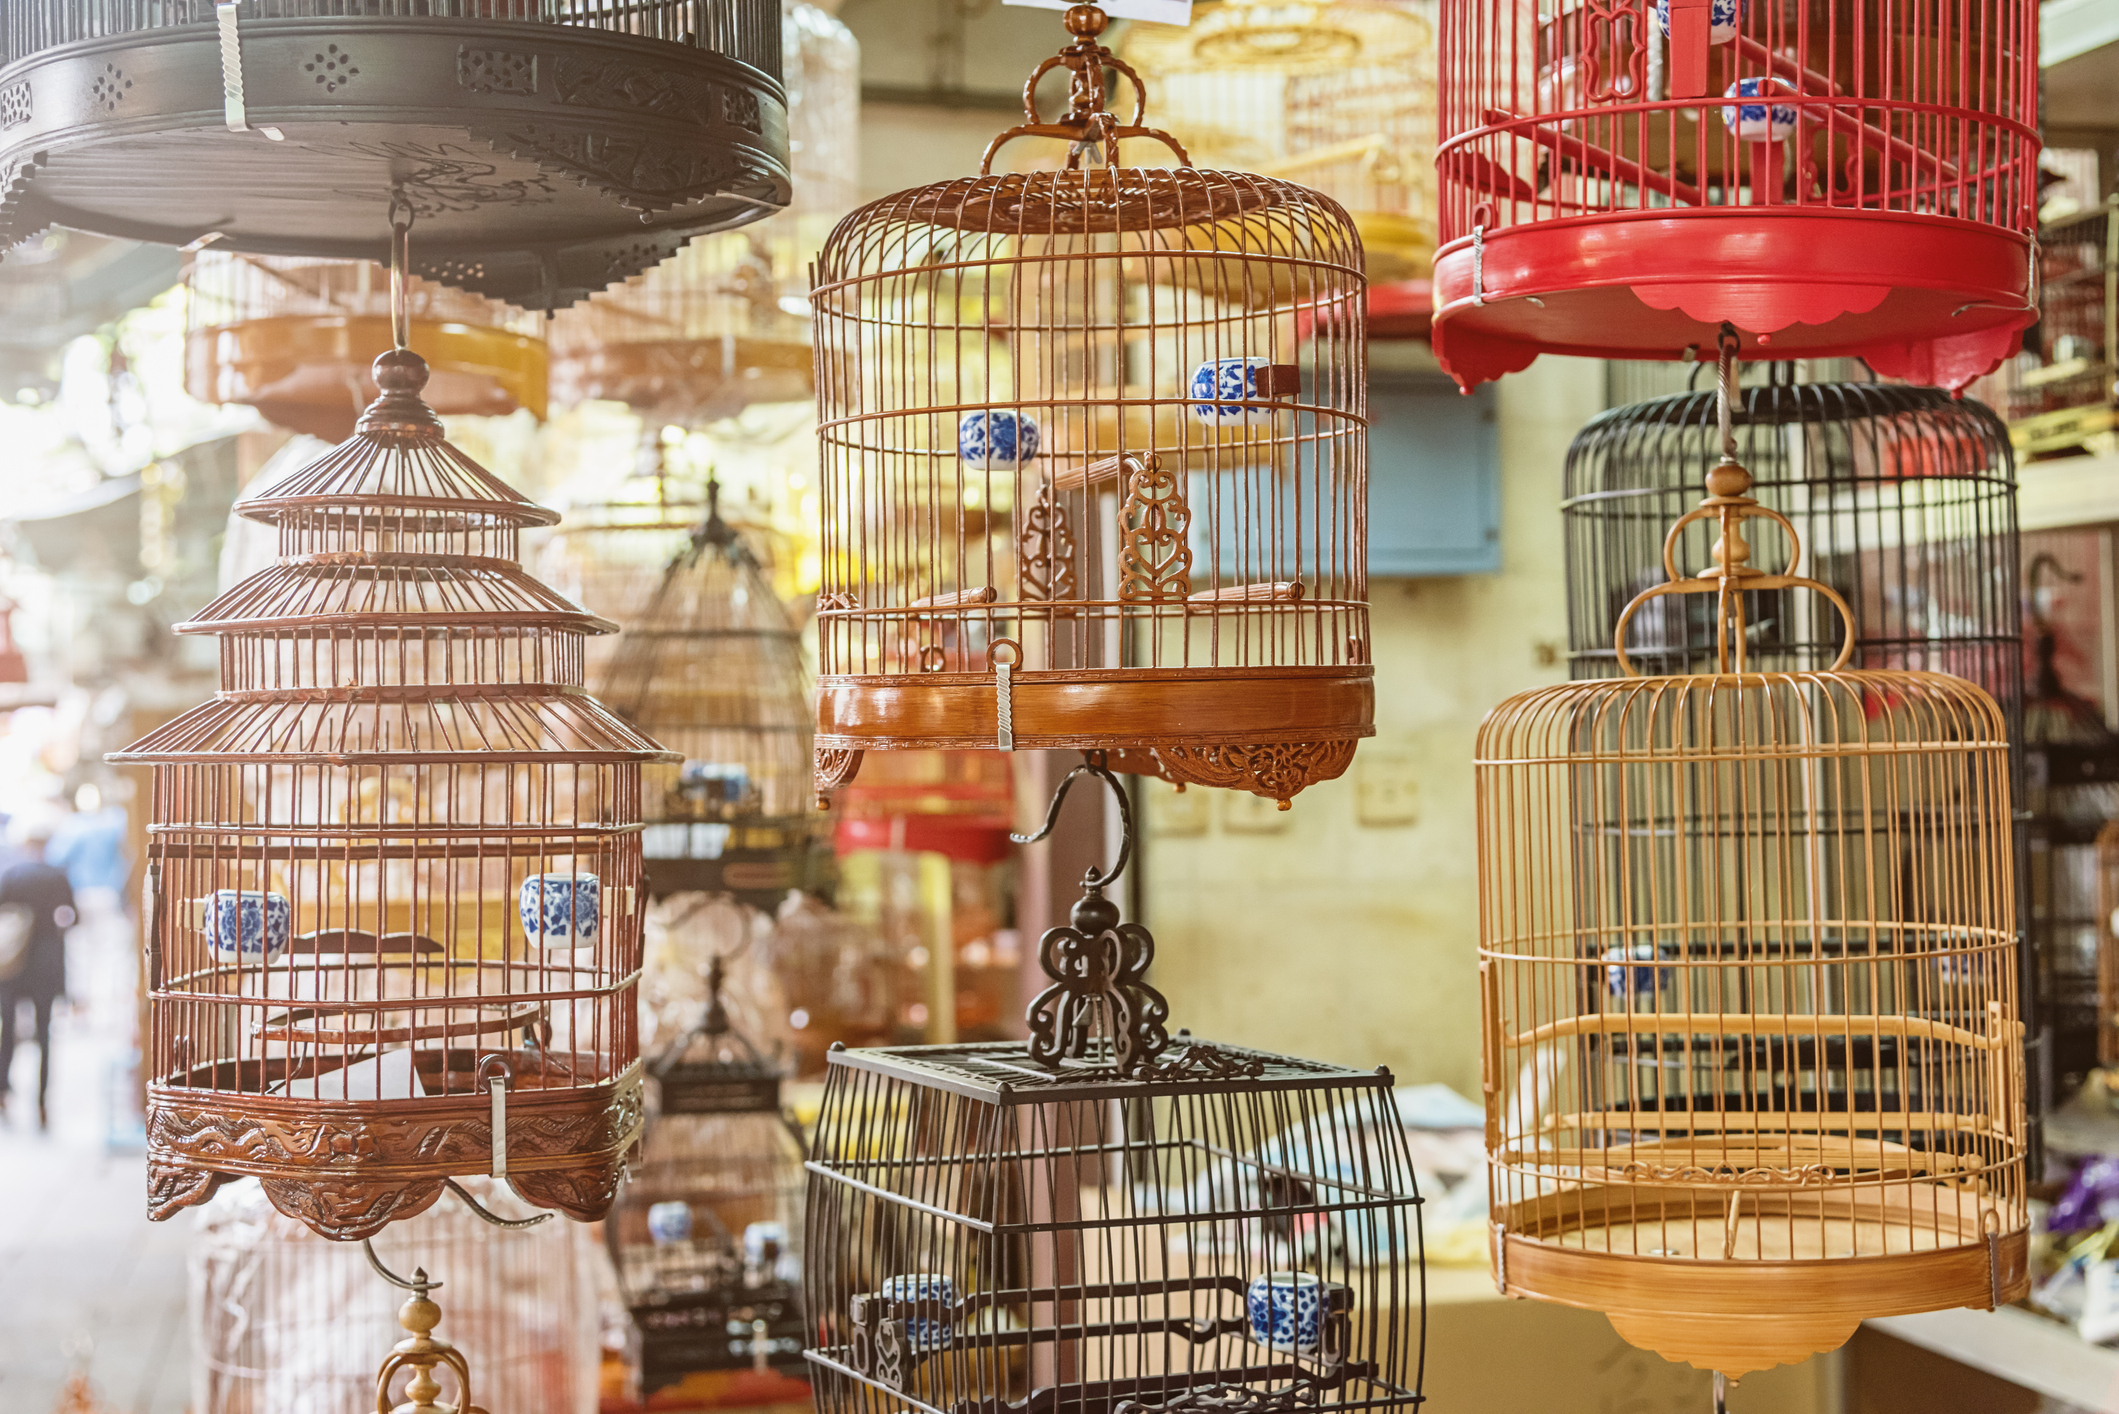 Decorative birdcages hanging in a market, with blurred shoppers in the background